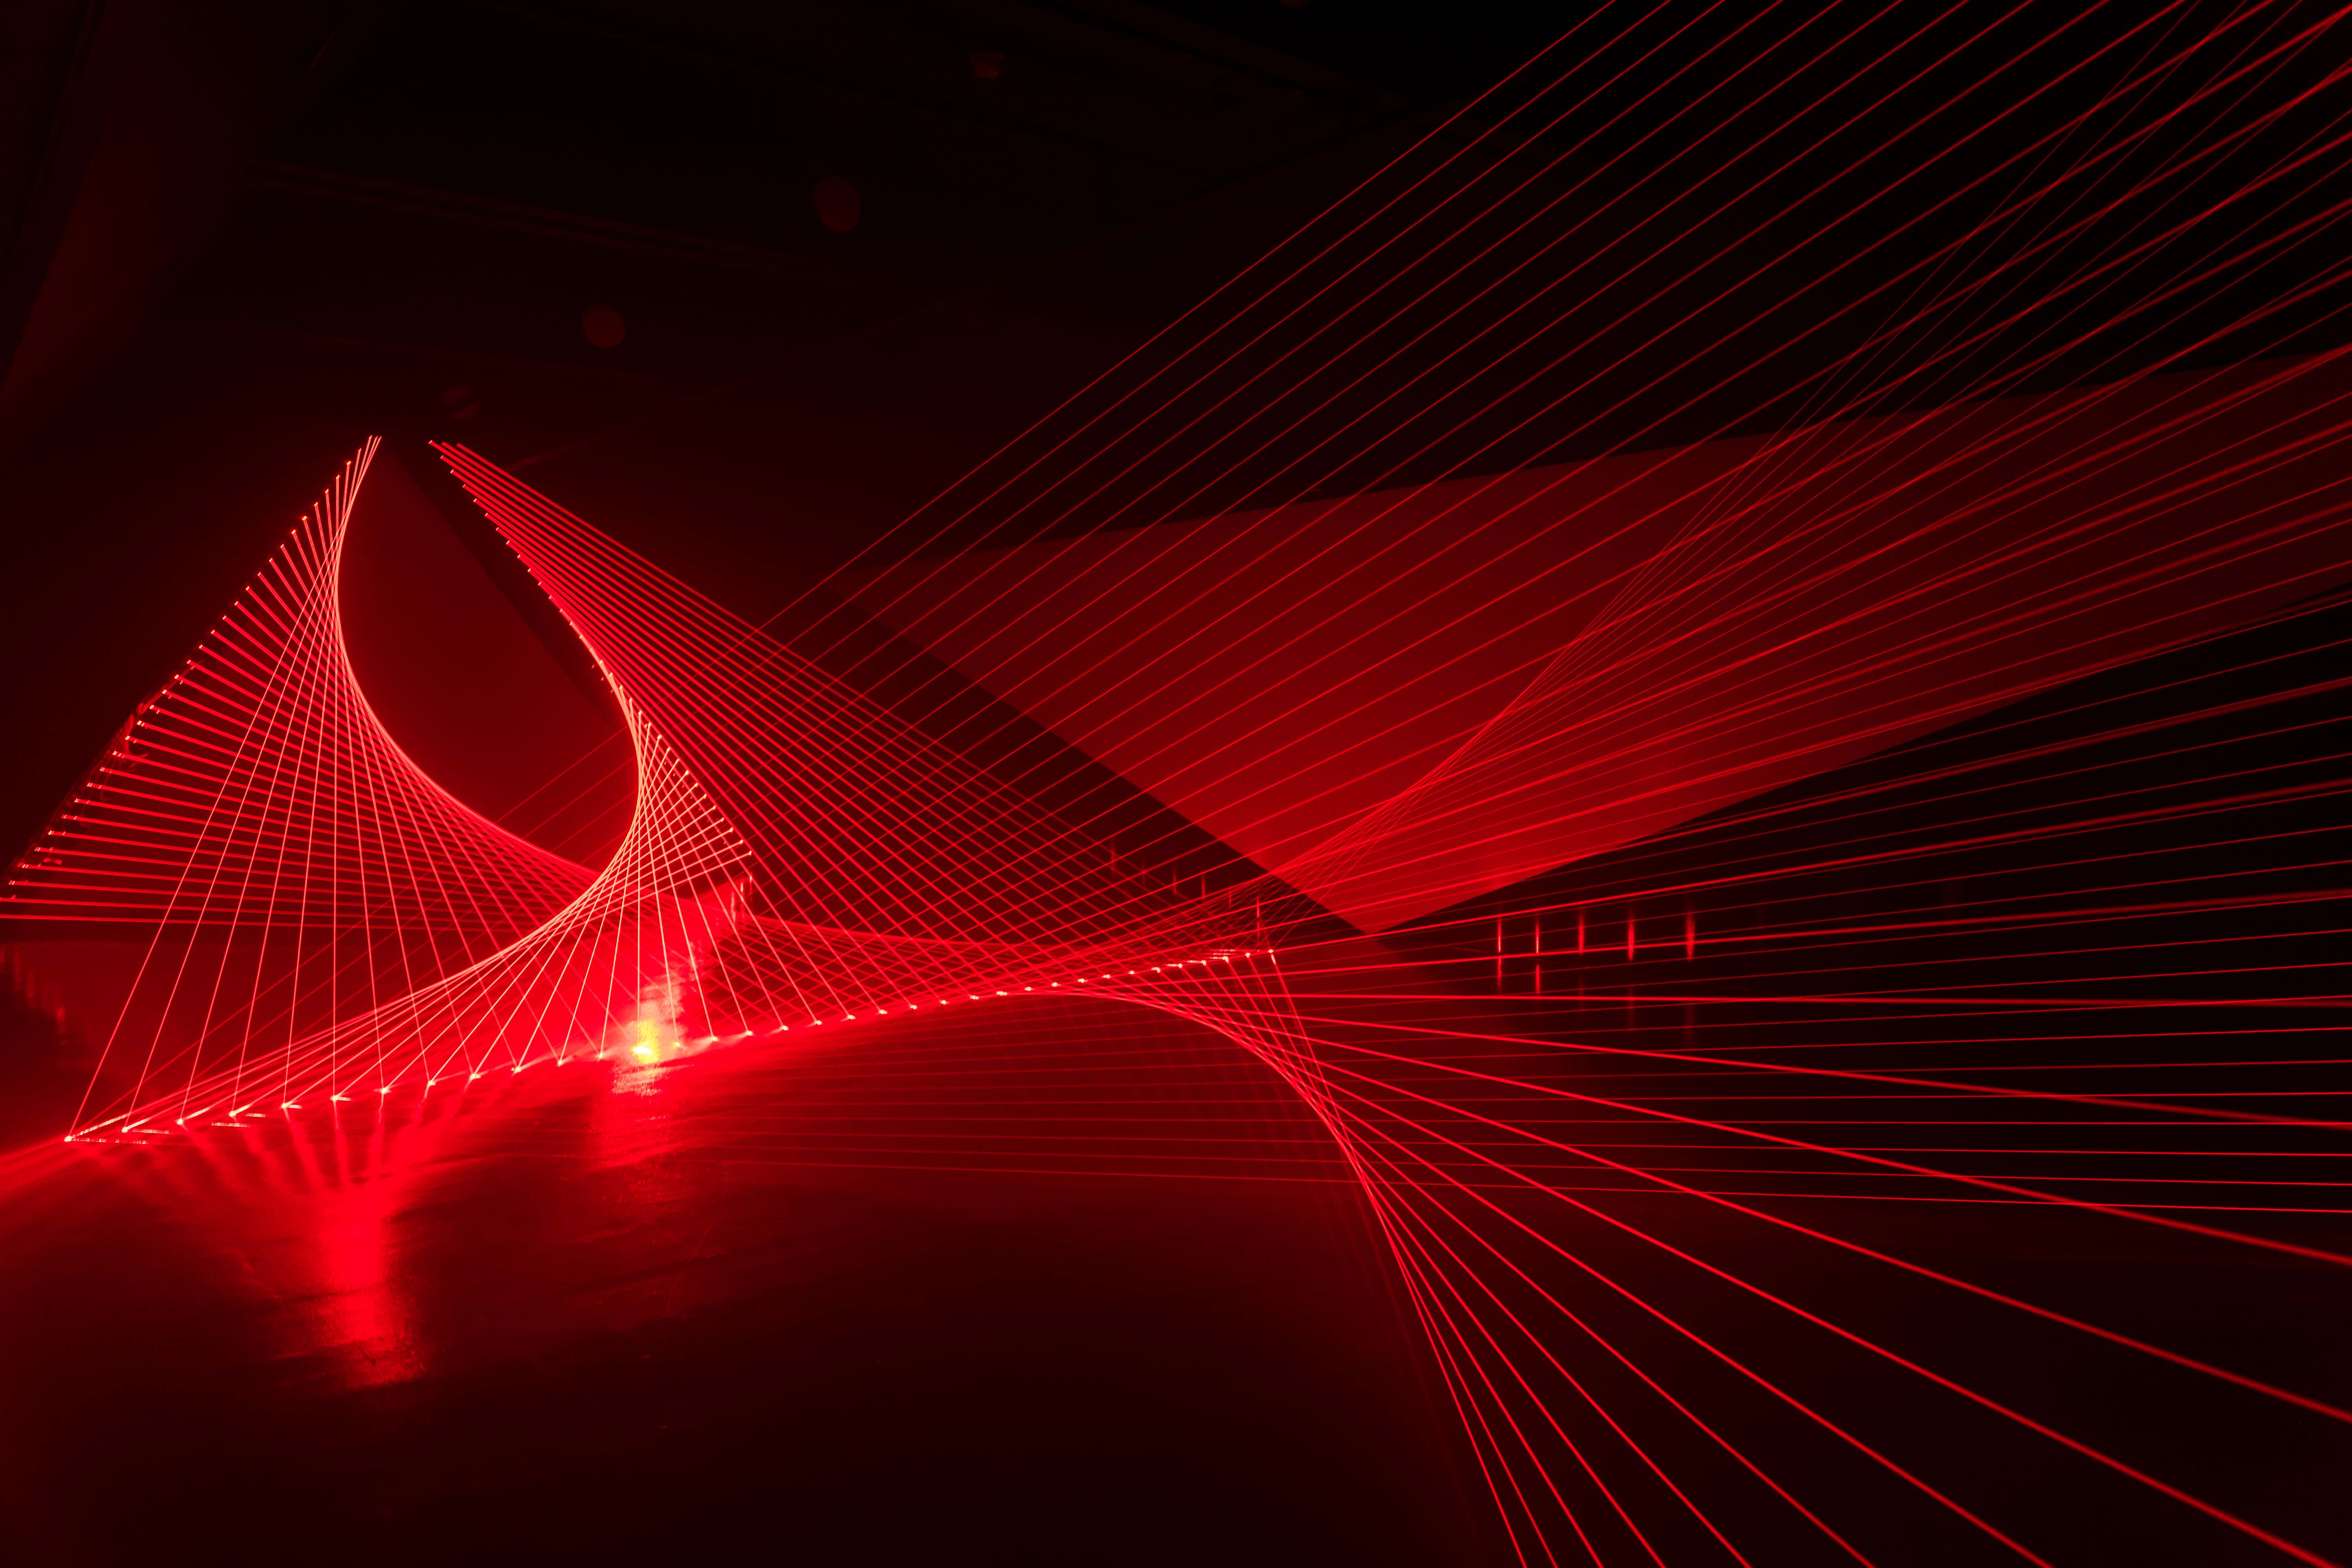  A wide view of Double Gemini from the side. Dozens of red lasers fan out in a specific way that creates smooth curves